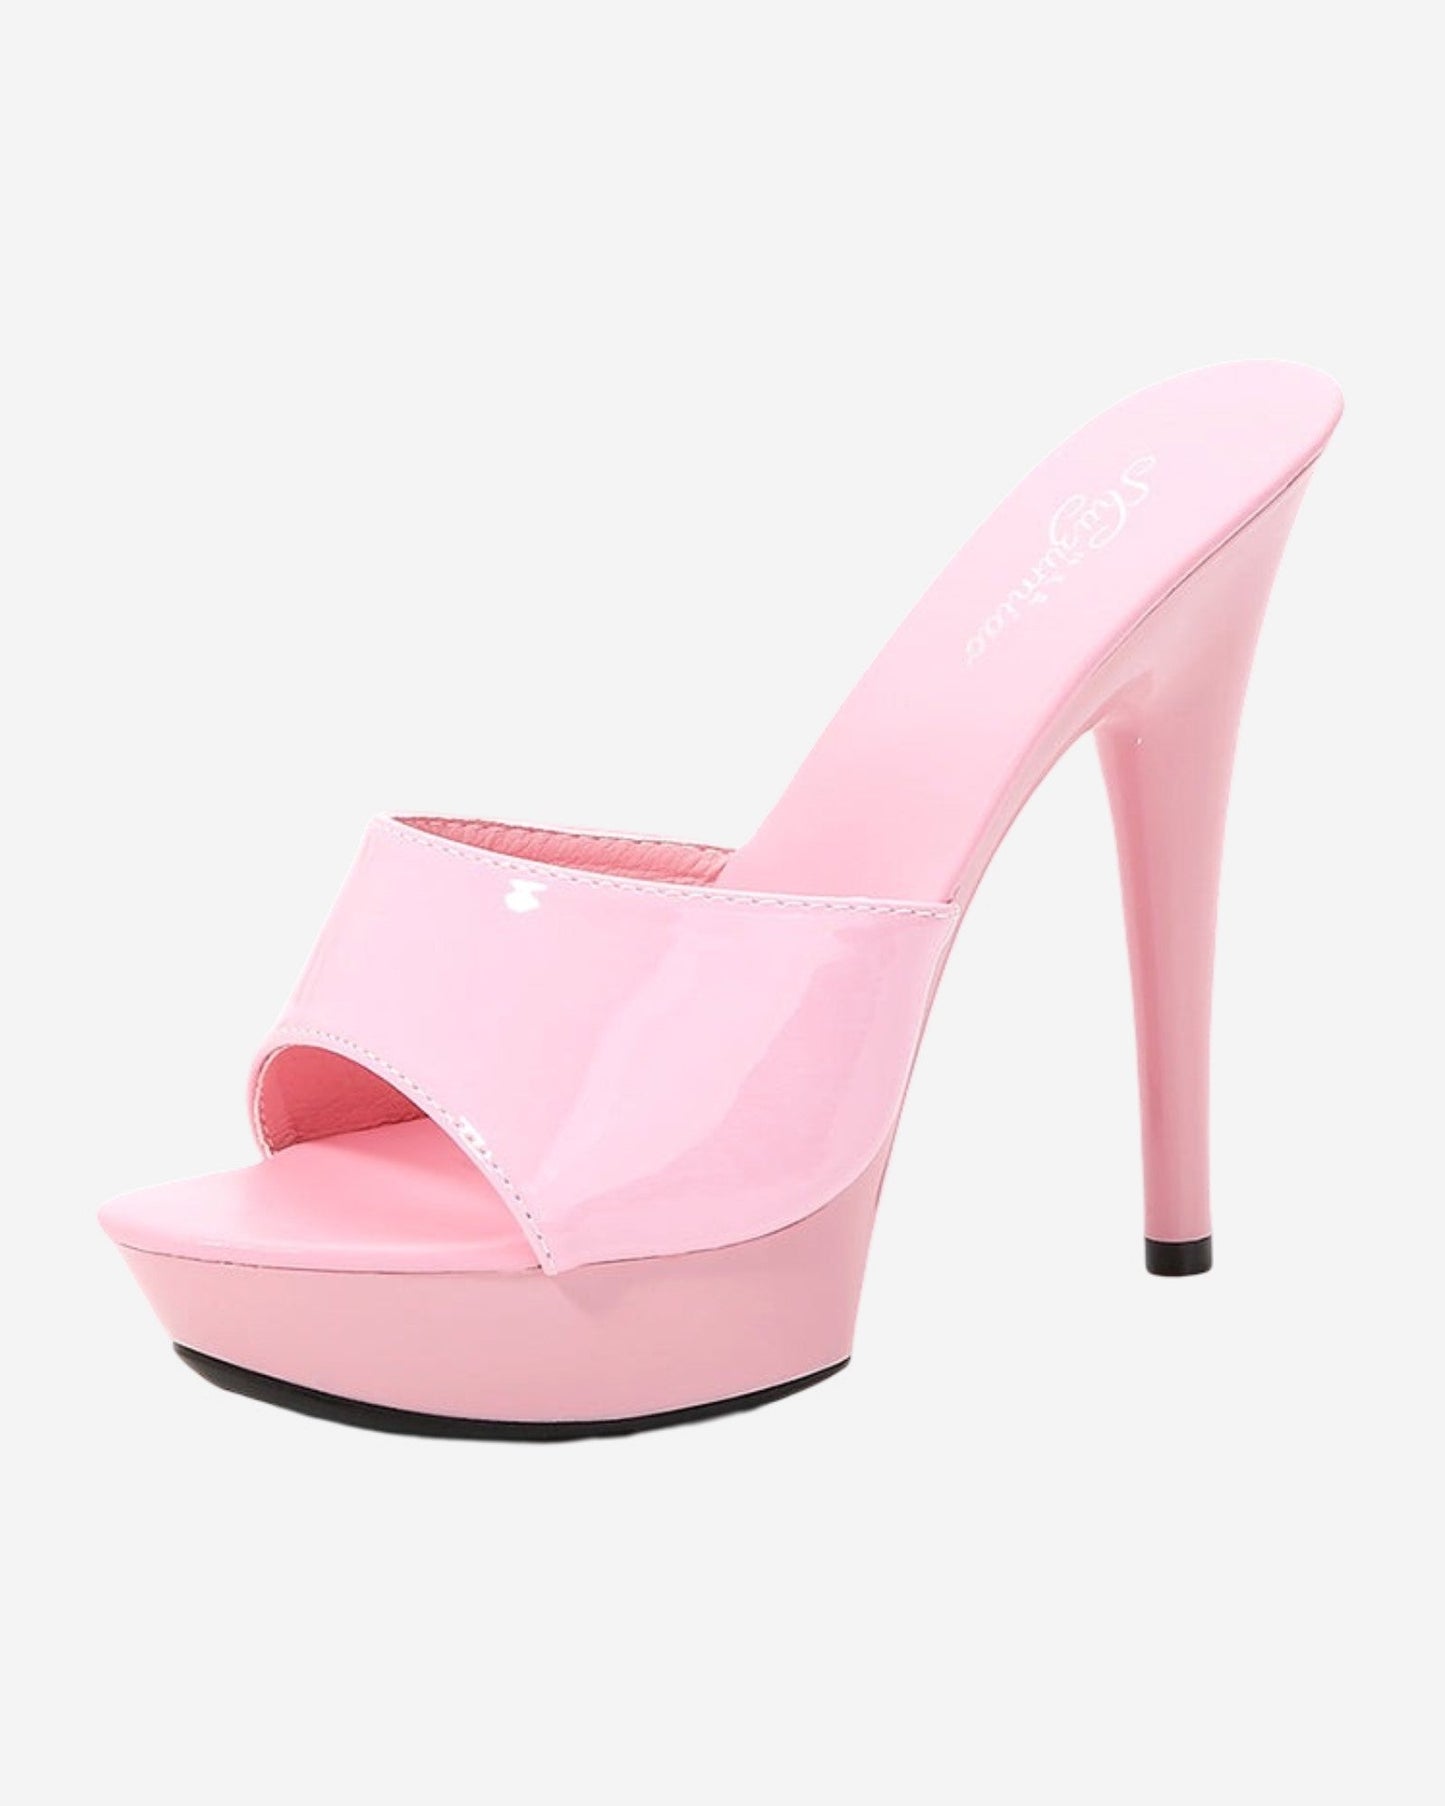 Shoes Pink High Heels Slippers